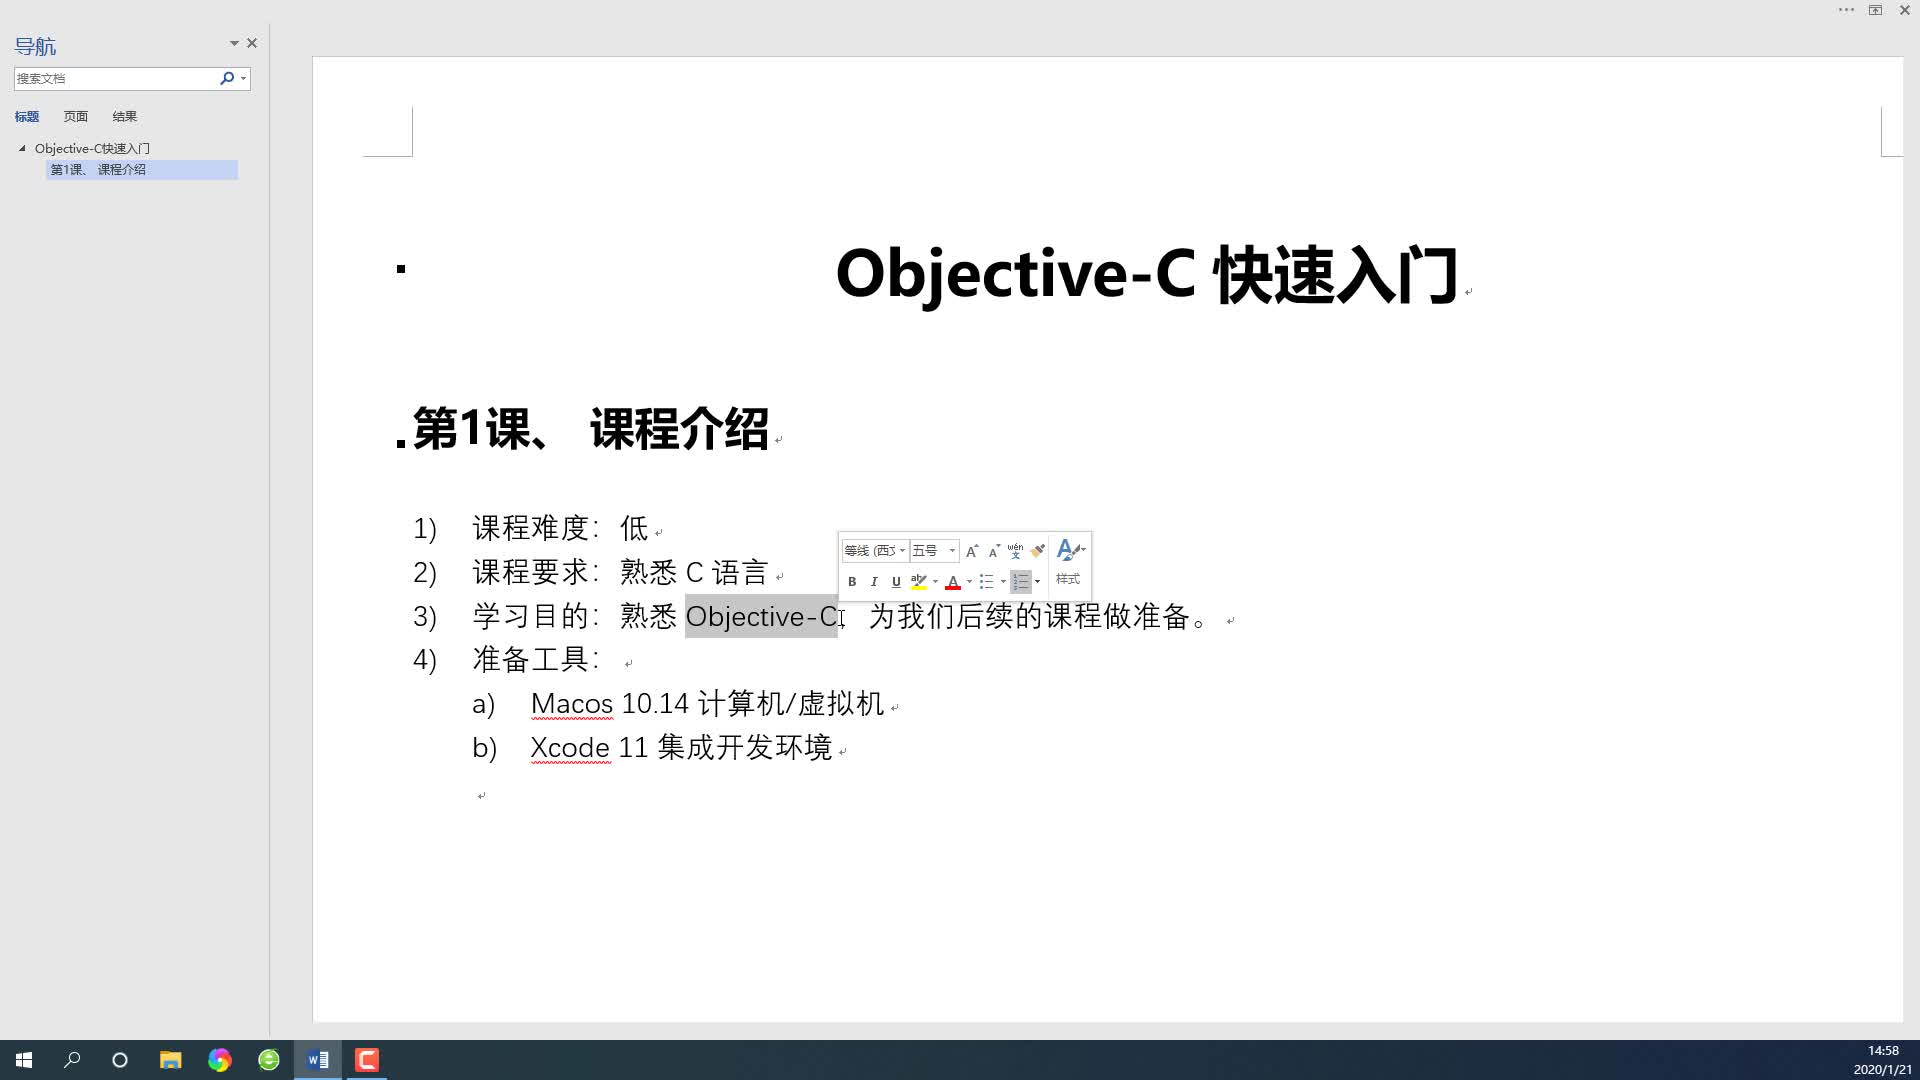 Objective-C 快速入门